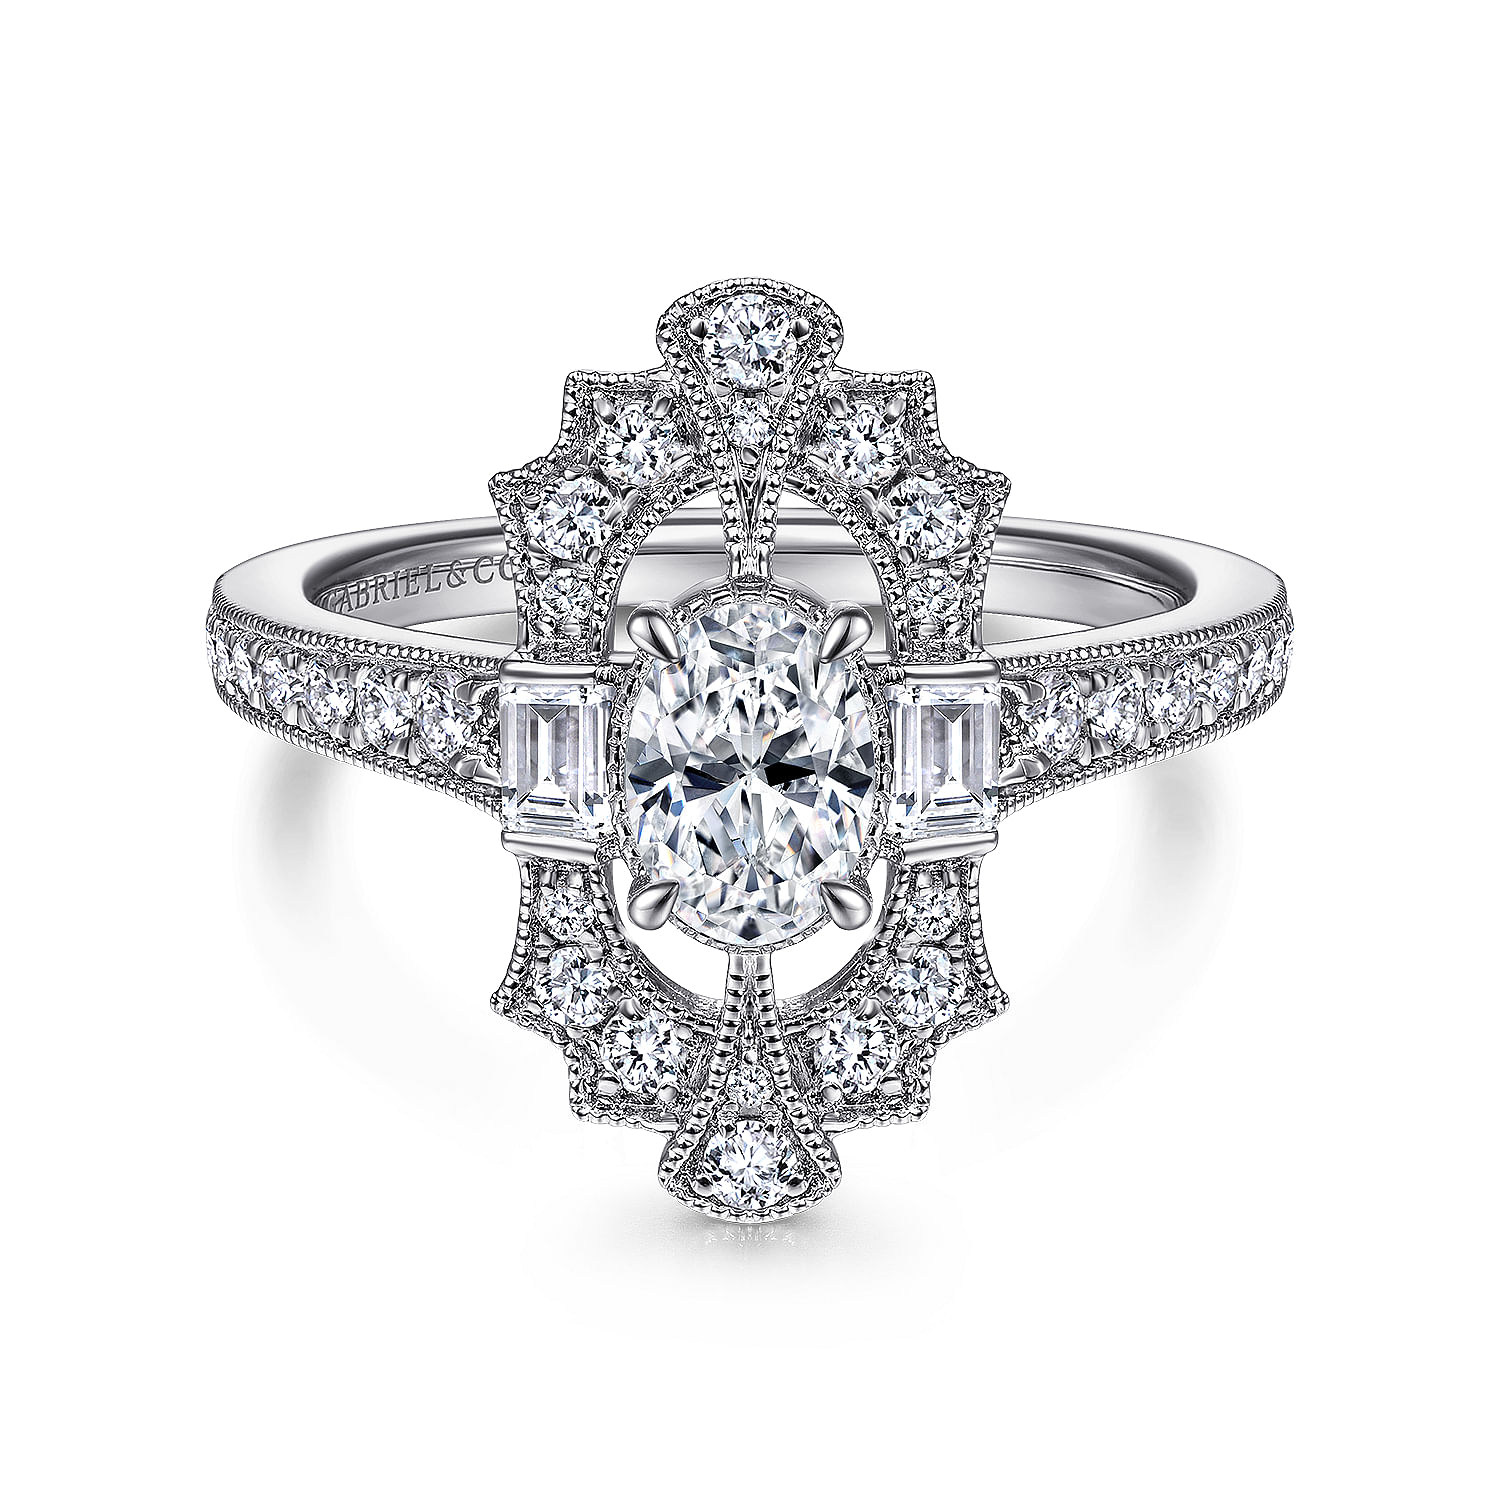 Art Deco 14K White Gold Oval Halo Diamond Channel Set Engagement Ring